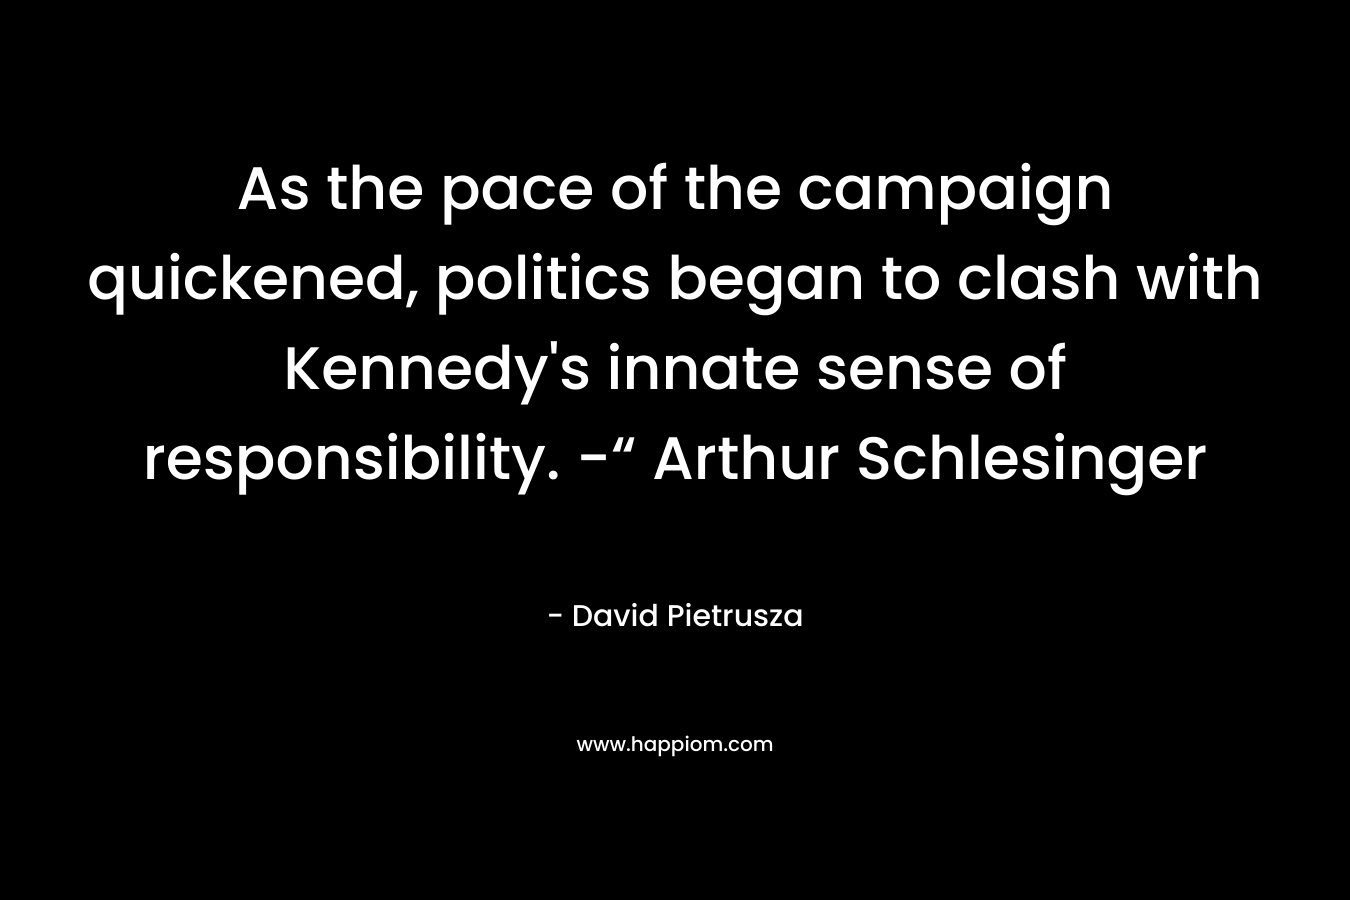 As the pace of the campaign quickened, politics began to clash with Kennedy’s innate sense of responsibility. -“ Arthur Schlesinger – David Pietrusza